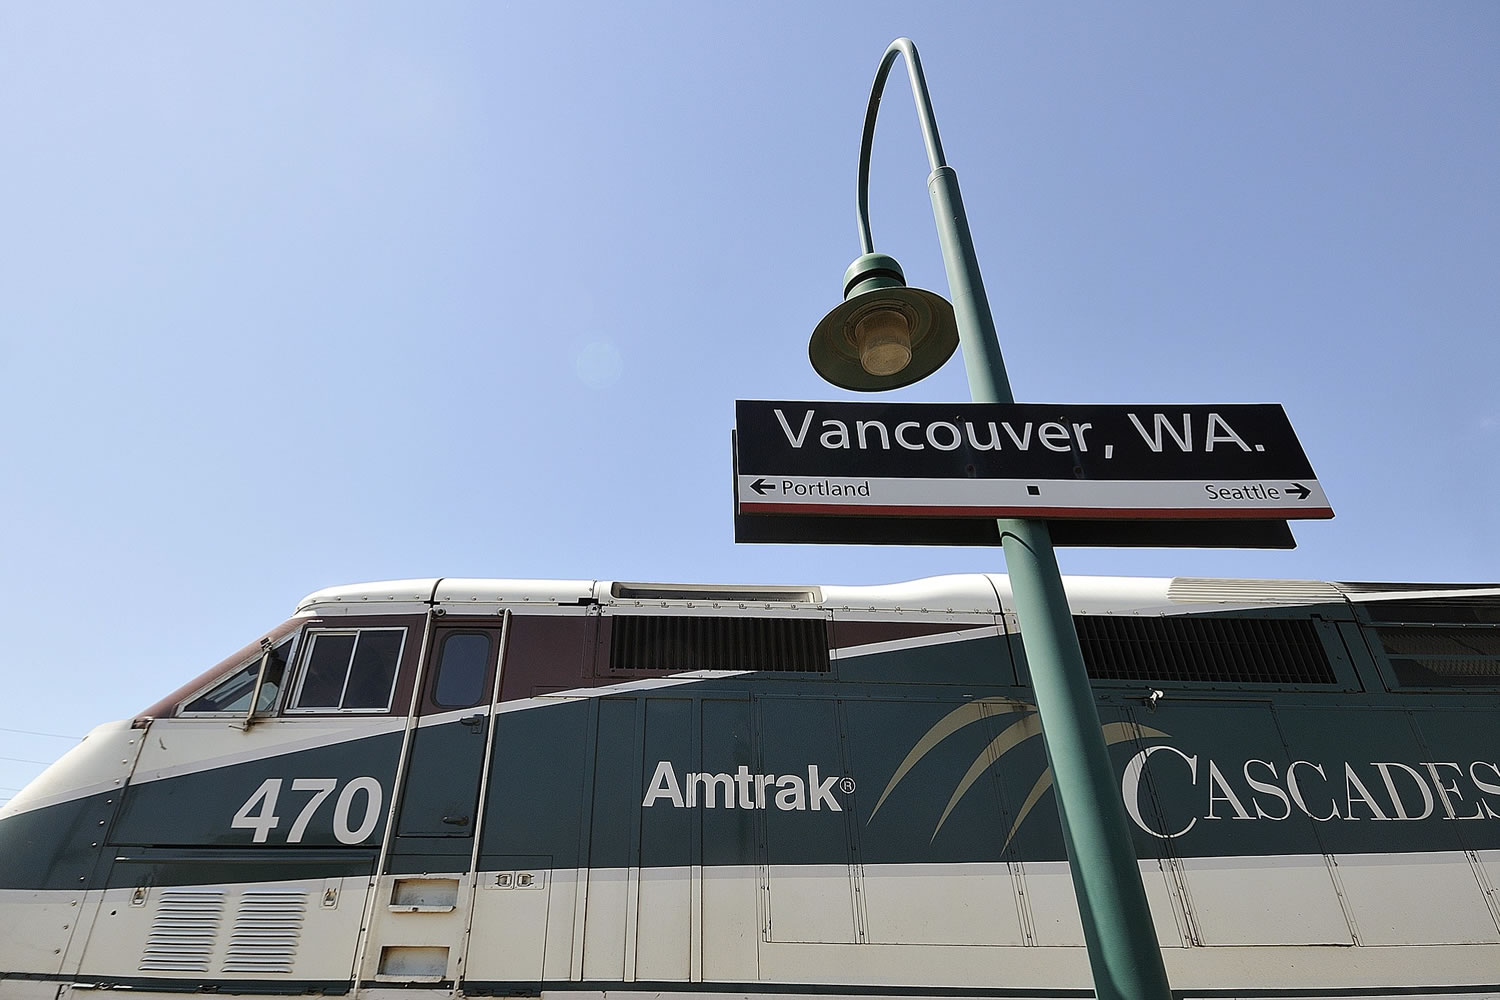 Amtrak's Cascades train headed southbound at the Vancouver Amtrak station in Vancouver.